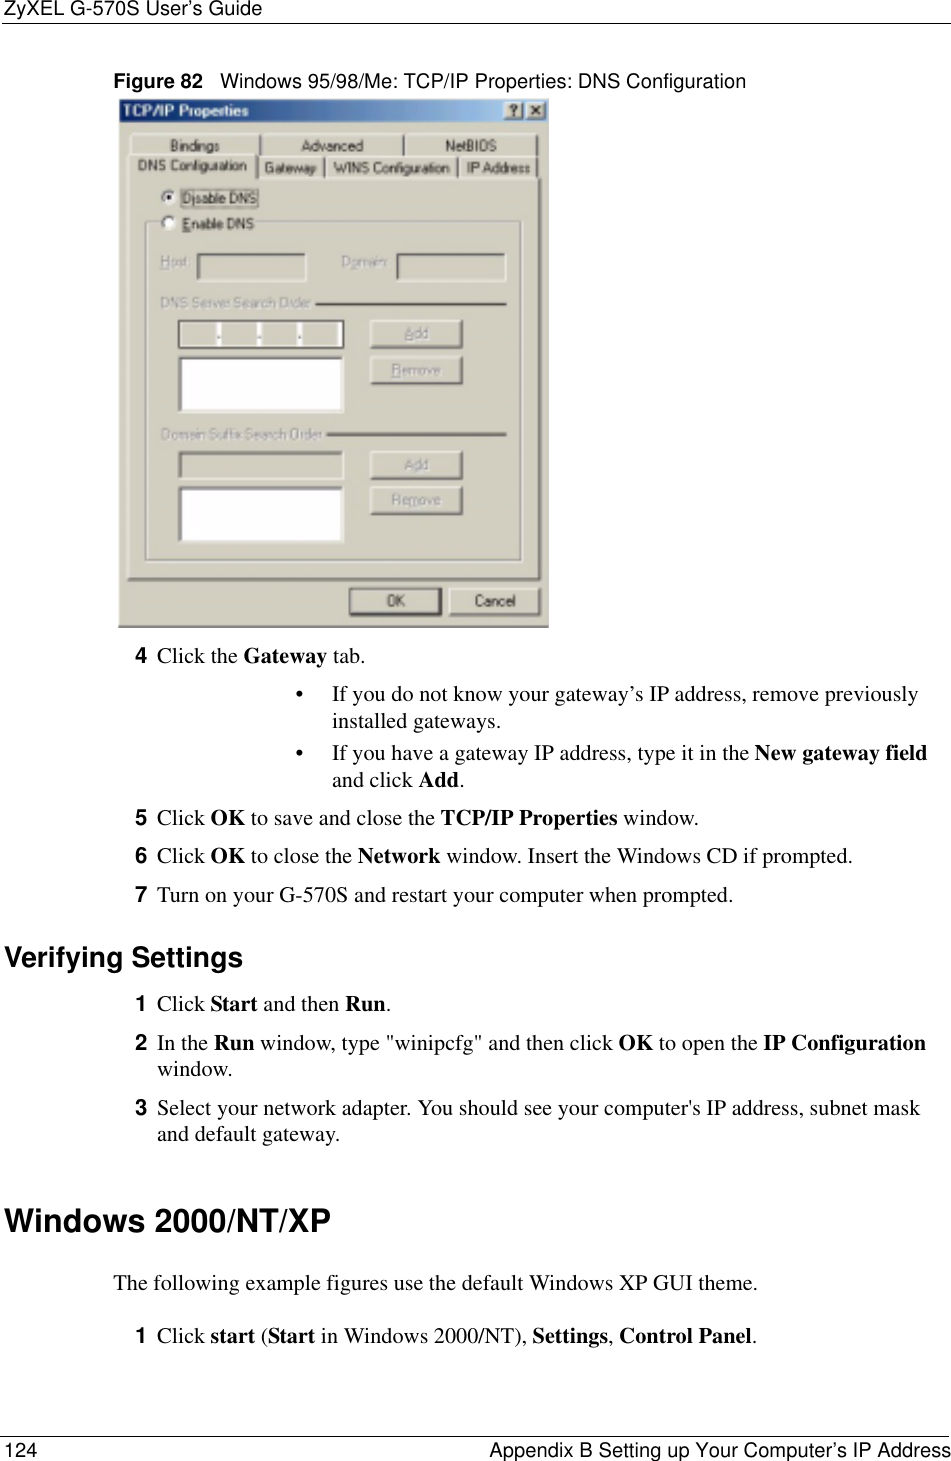 ZyXEL G-570S User’s Guide124 Appendix B Setting up Your Computer’s IP AddressFigure 82   Windows 95/98/Me: TCP/IP Properties: DNS Configuration4Click the Gateway tab.• If you do not know your gateway’s IP address, remove previously installed gateways.• If you have a gateway IP address, type it in the New gateway fieldand click Add.5Click OK to save and close the TCP/IP Properties window.6Click OK to close the Network window. Insert the Windows CD if prompted.7Turn on your G-570S and restart your computer when prompted.Verifying Settings1Click Start and then Run.2In the Run window, type &quot;winipcfg&quot; and then click OK to open the IP Configurationwindow.3Select your network adapter. You should see your computer&apos;s IP address, subnet mask and default gateway.Windows 2000/NT/XPThe following example figures use the default Windows XP GUI theme.1Click start (Start in Windows 2000/NT), Settings,Control Panel.